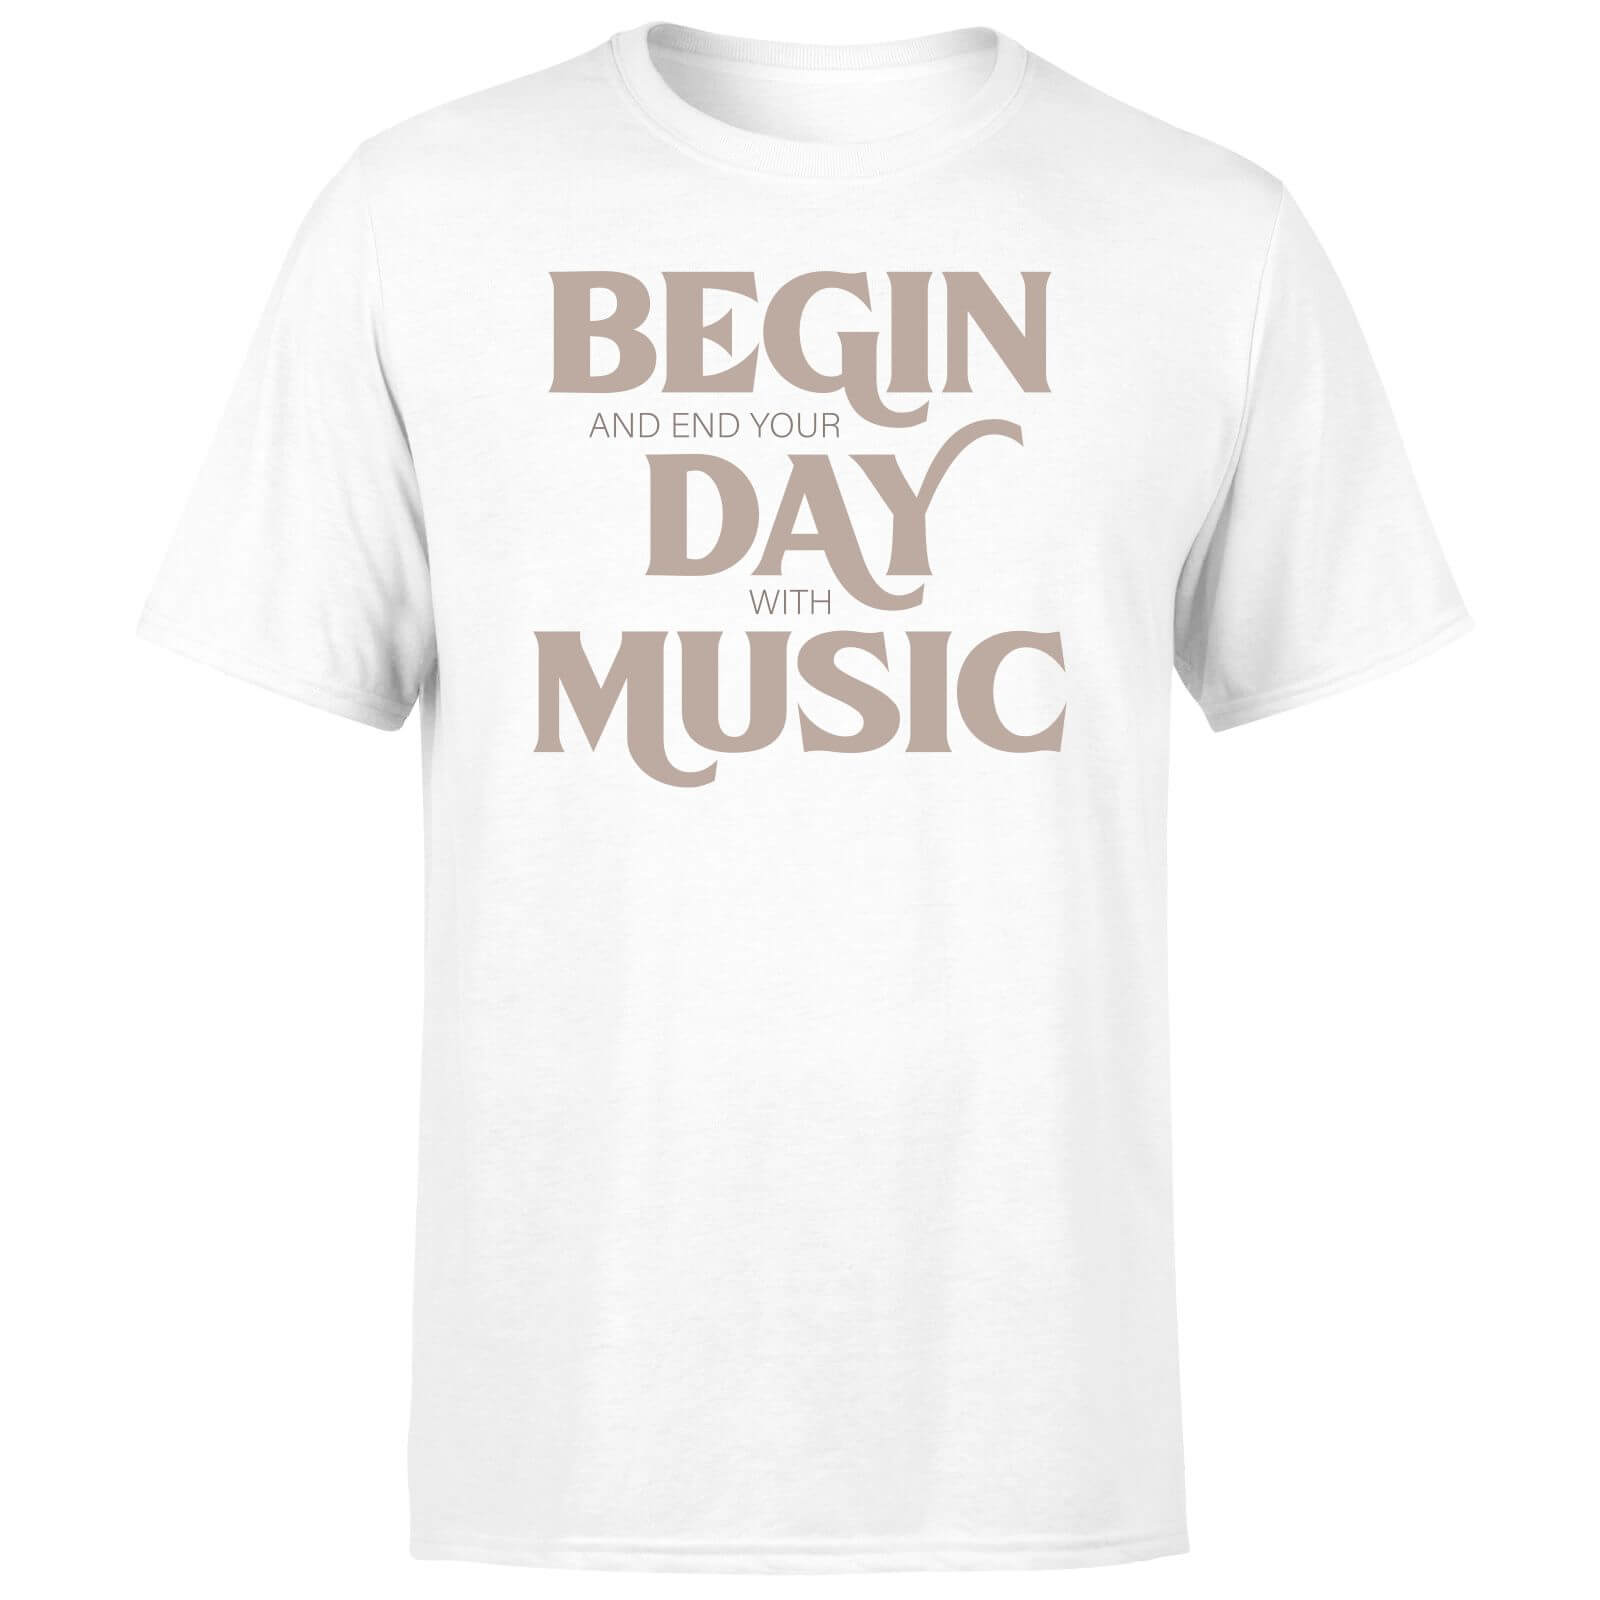 Begin And End Your Day With Music Men's T-Shirt - White - XS - White